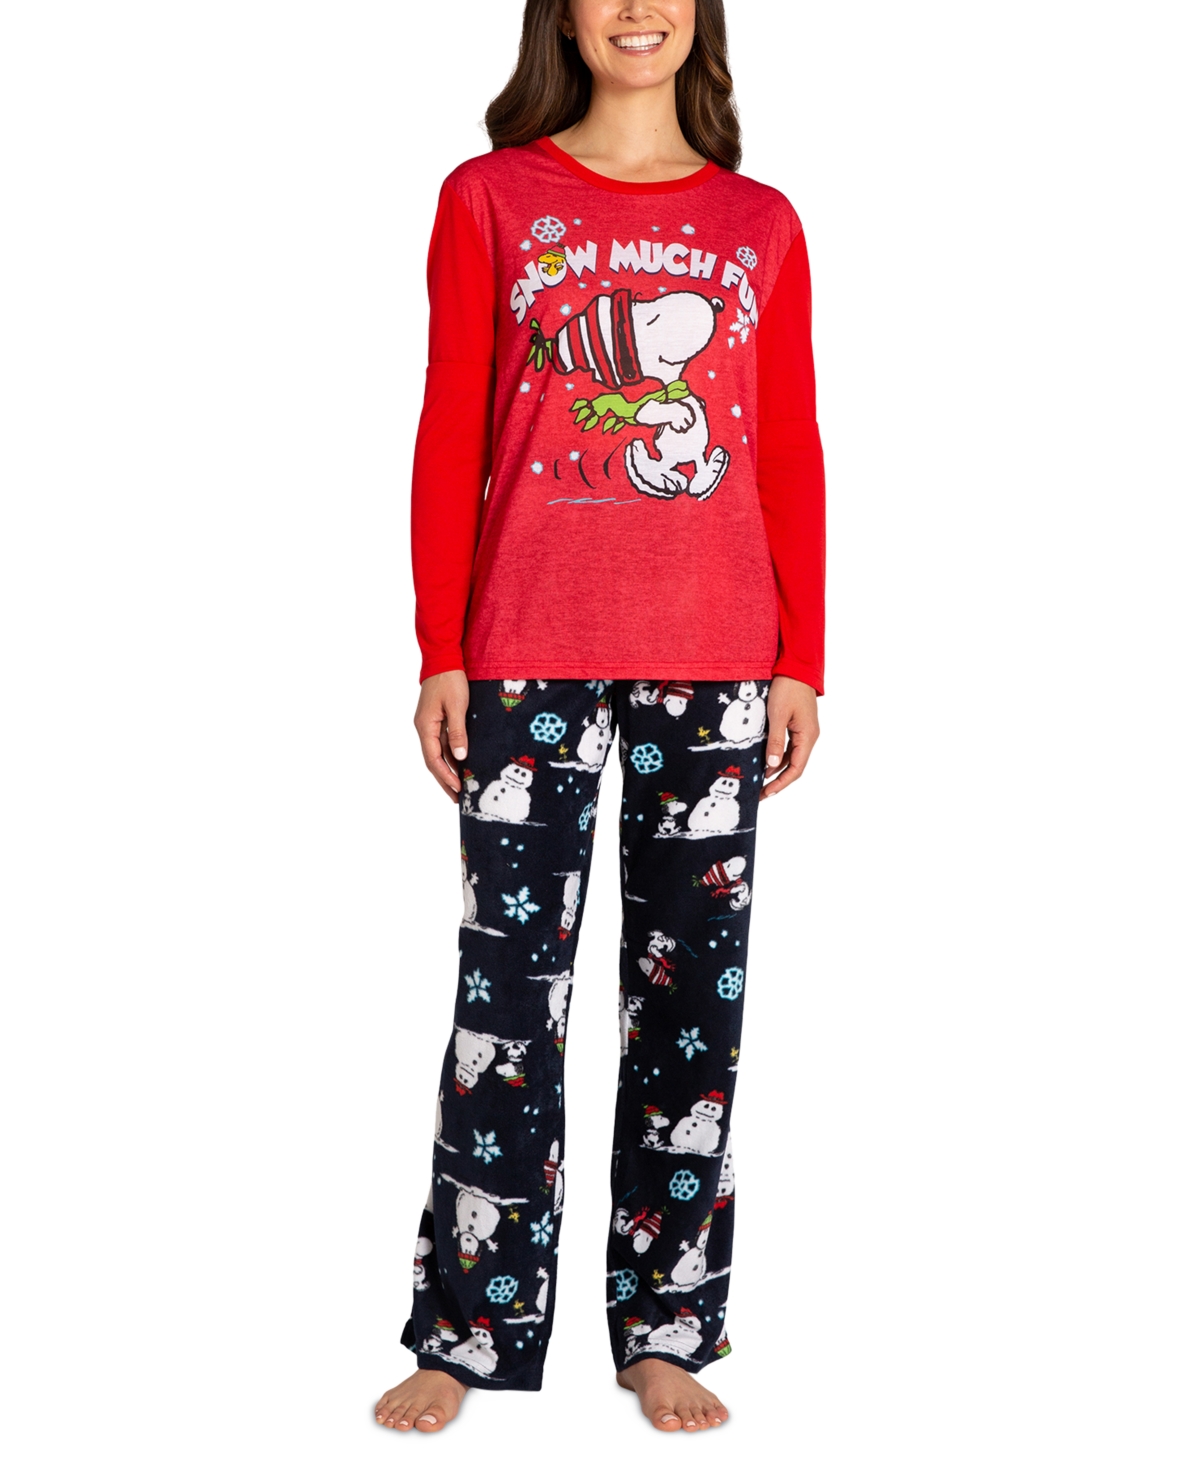 Briefly Stated Matching Women's Peanuts Long-sleeve Top And Pajama Pants Set In Grey